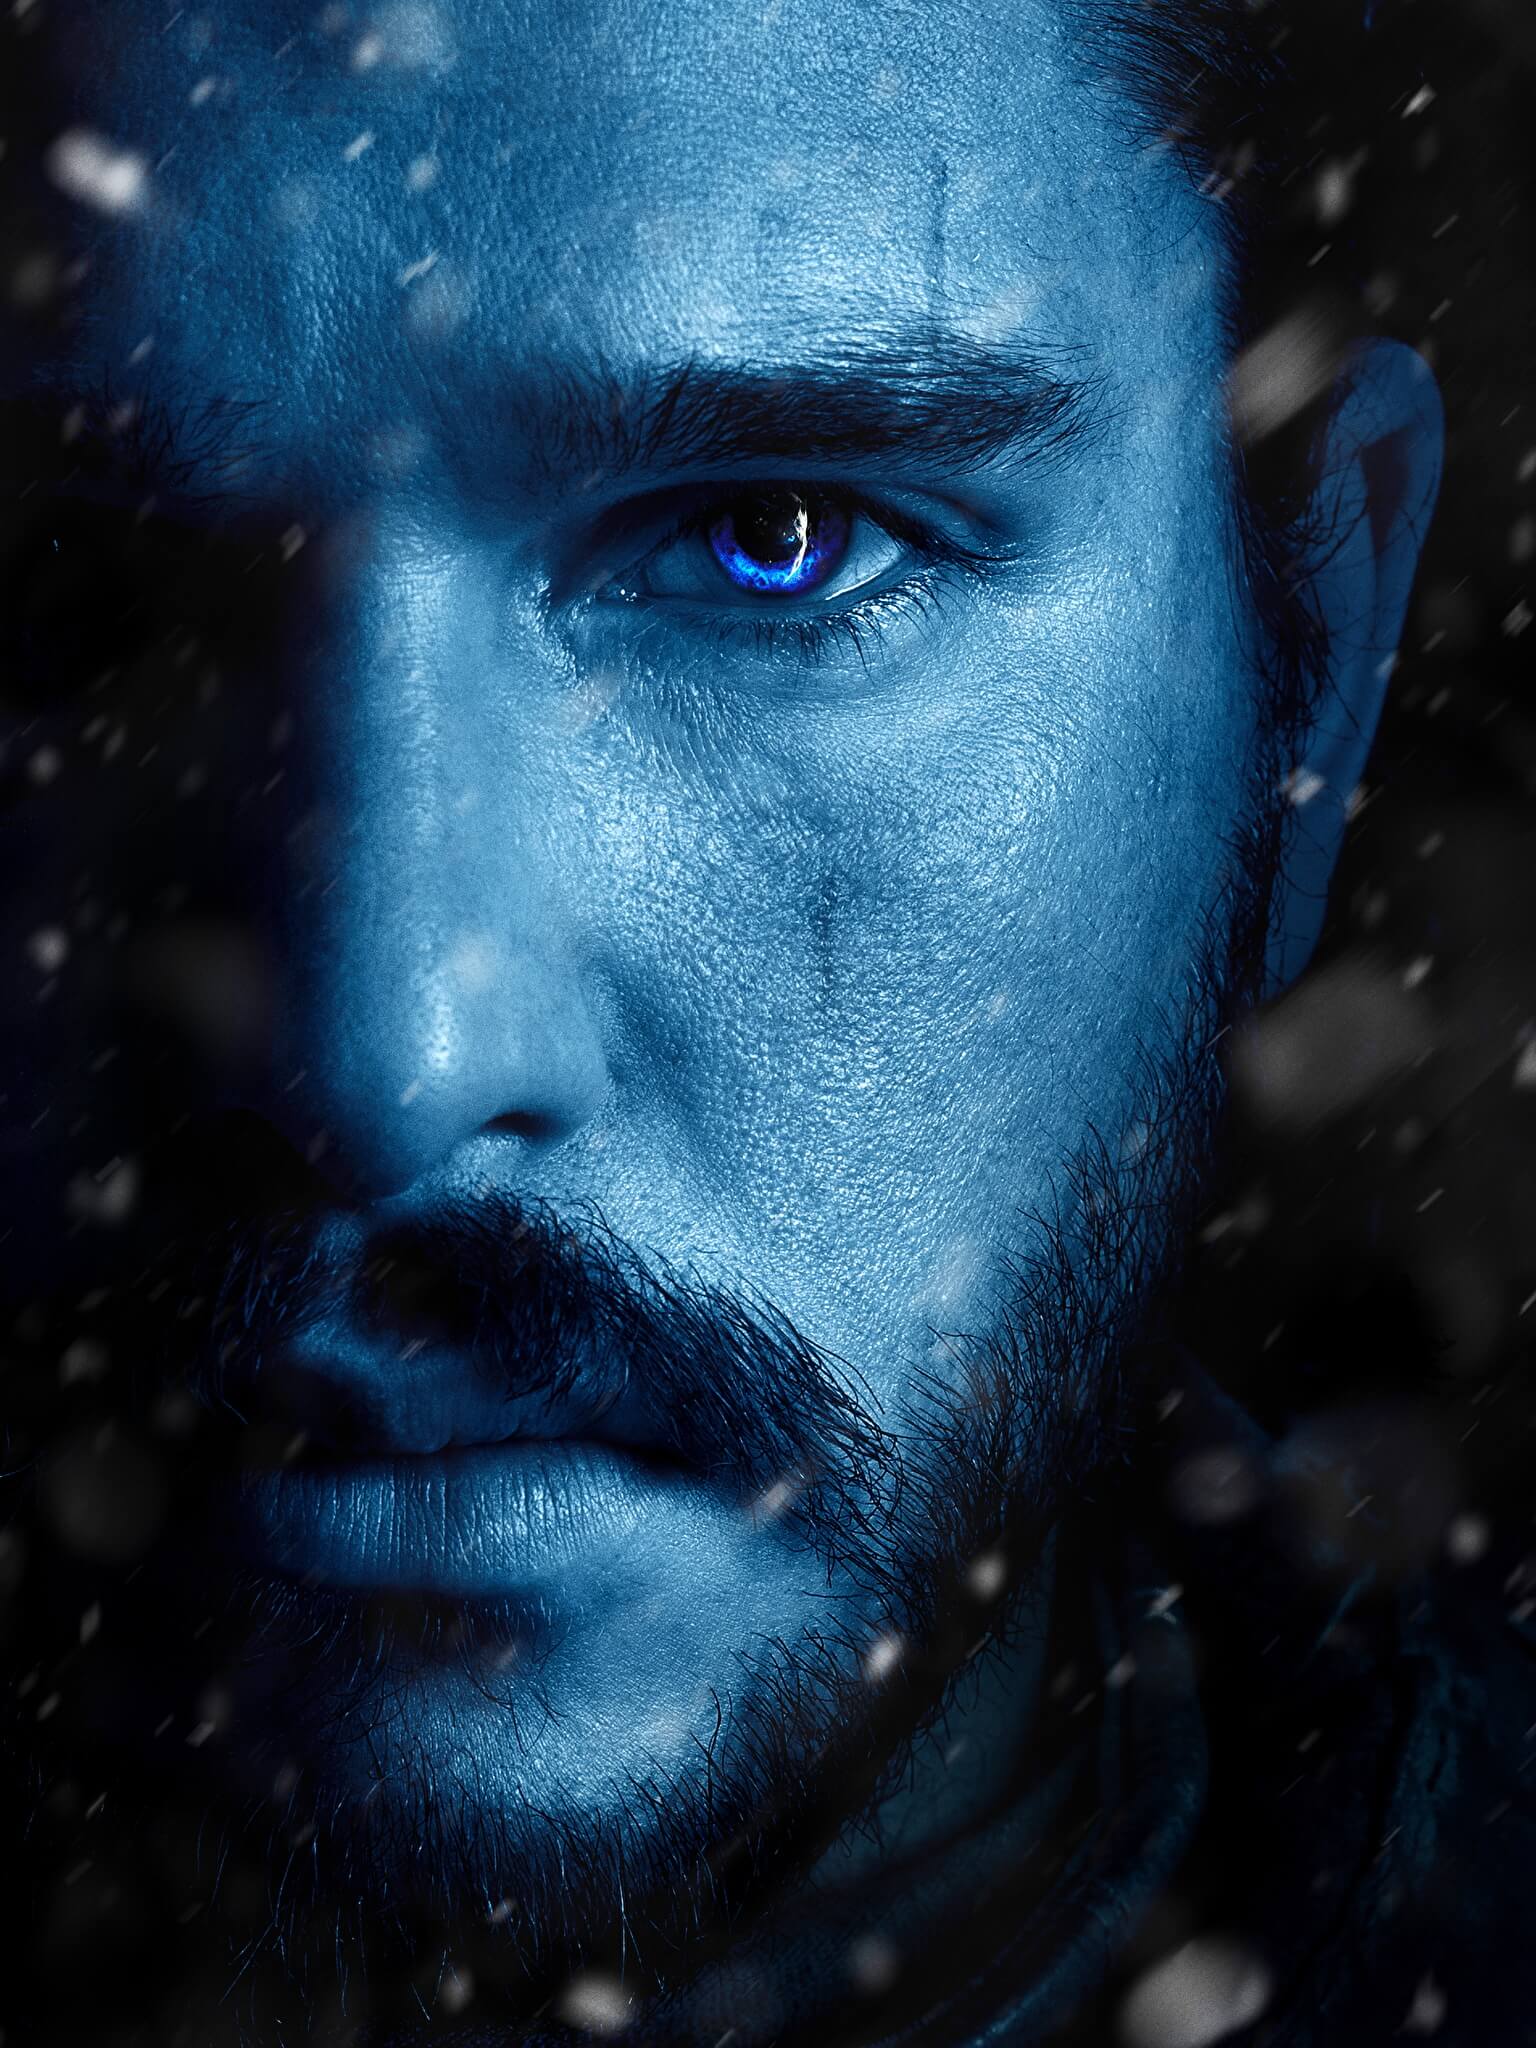 Game of Thrones Wallpapers: Get It Today For Your Mobile